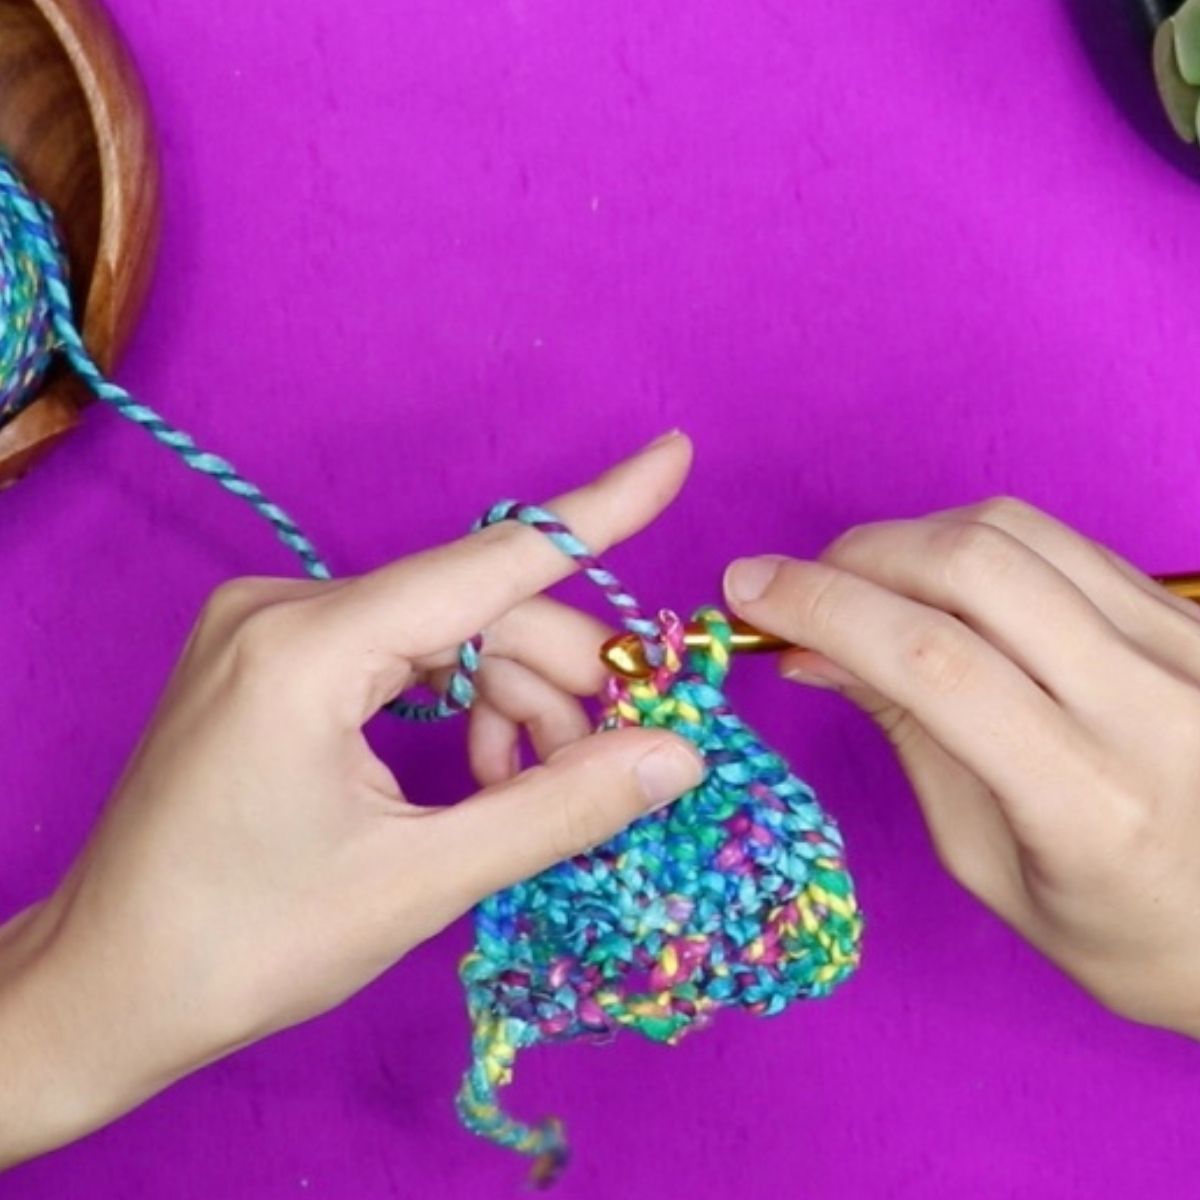 The Best Crochet Kit For Beginners With Free Video Course